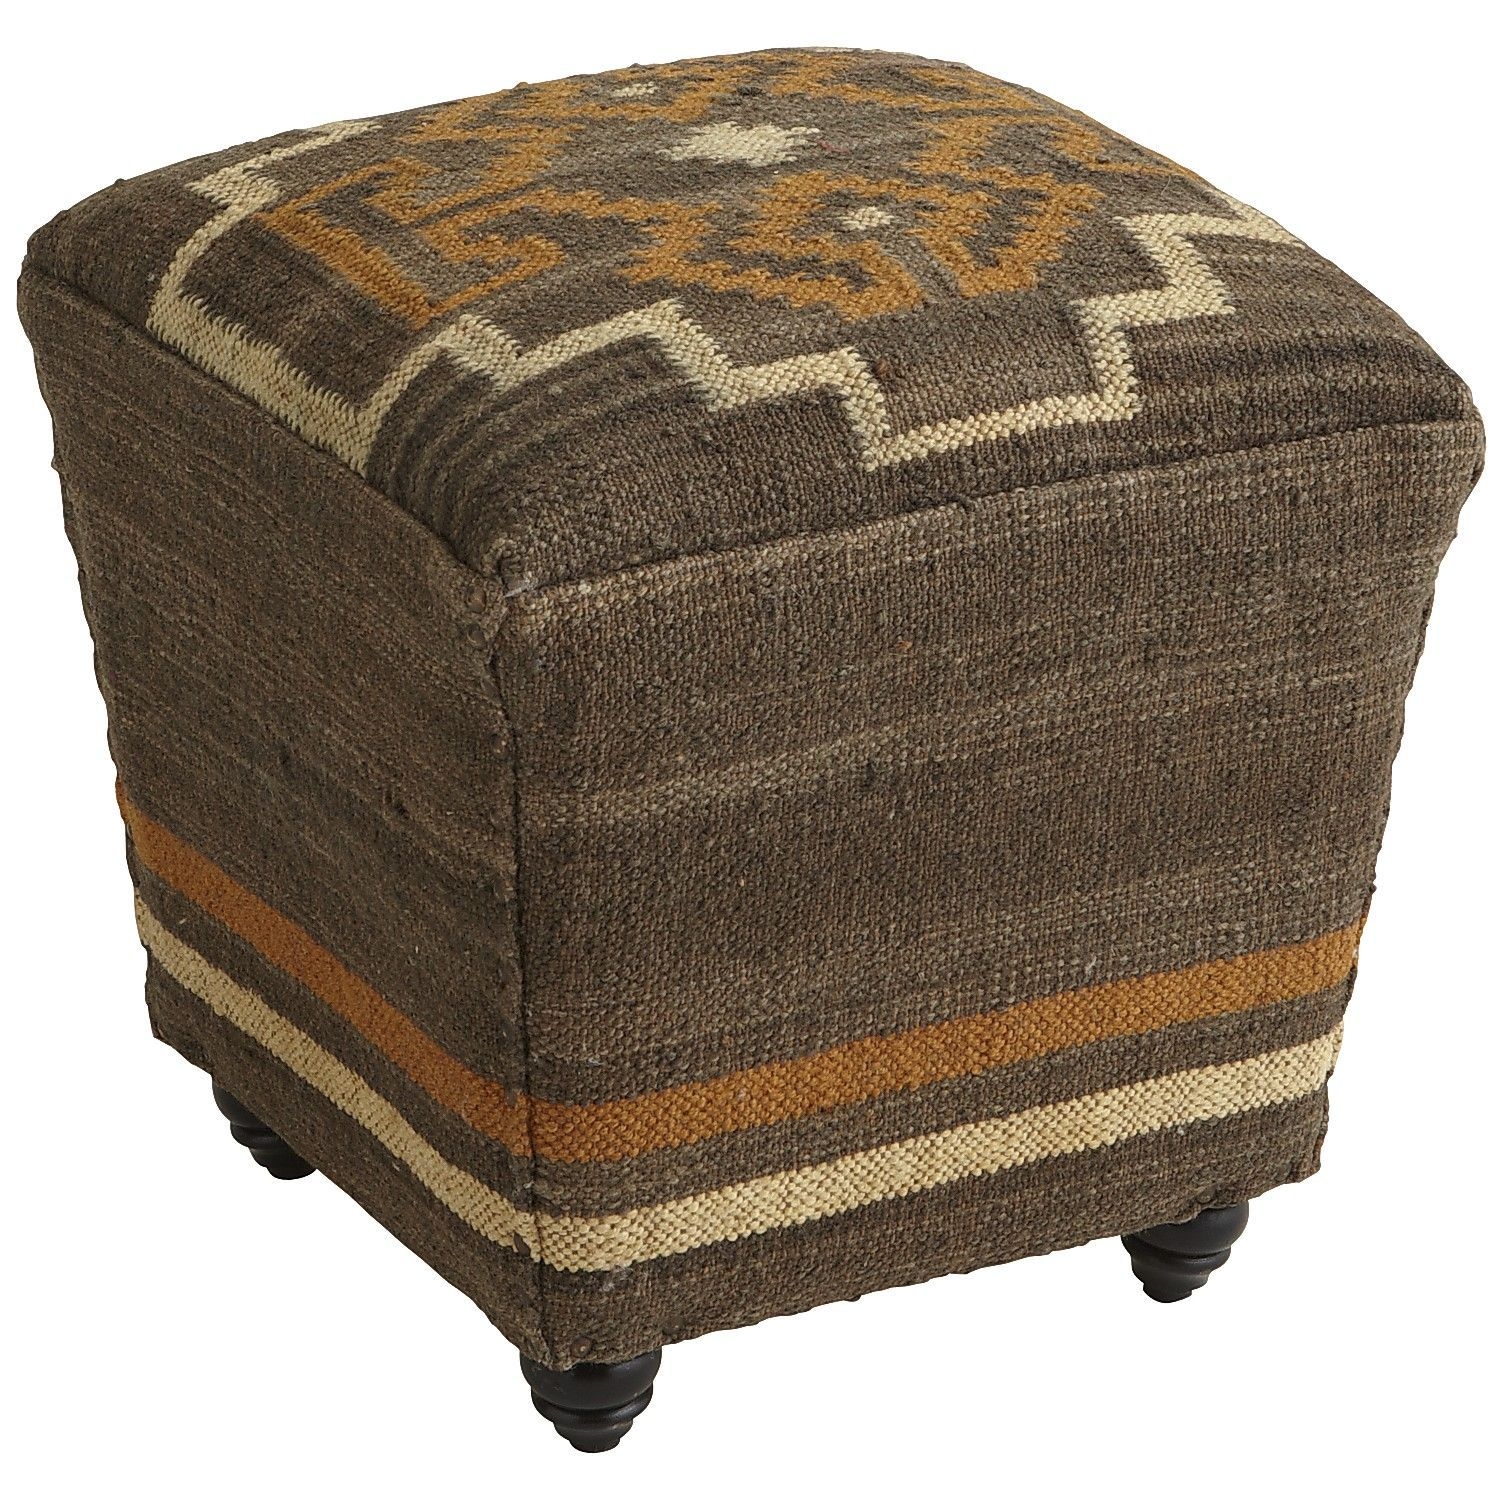 Kilim ottoman tapestry bum candy